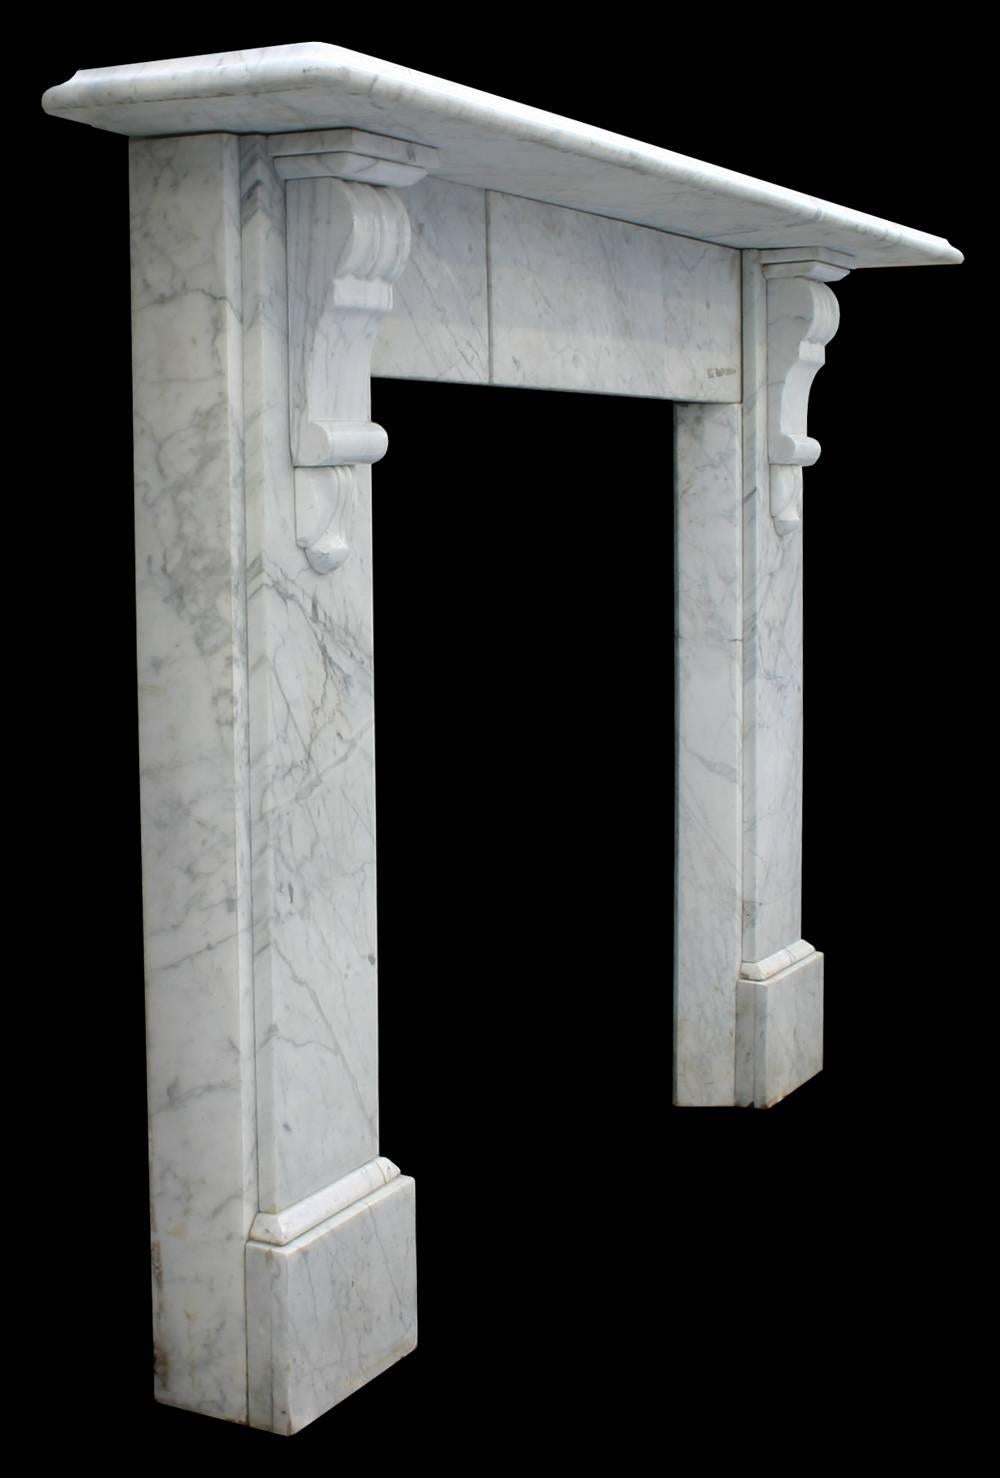 Antique late Victorian Carrara marble fire surround with fluted corbels supporting the shelf.

Images prior to restoration. This chimneypiece is awaiting restoration, please enquire as to the lead time to complete the restoration before ordering.